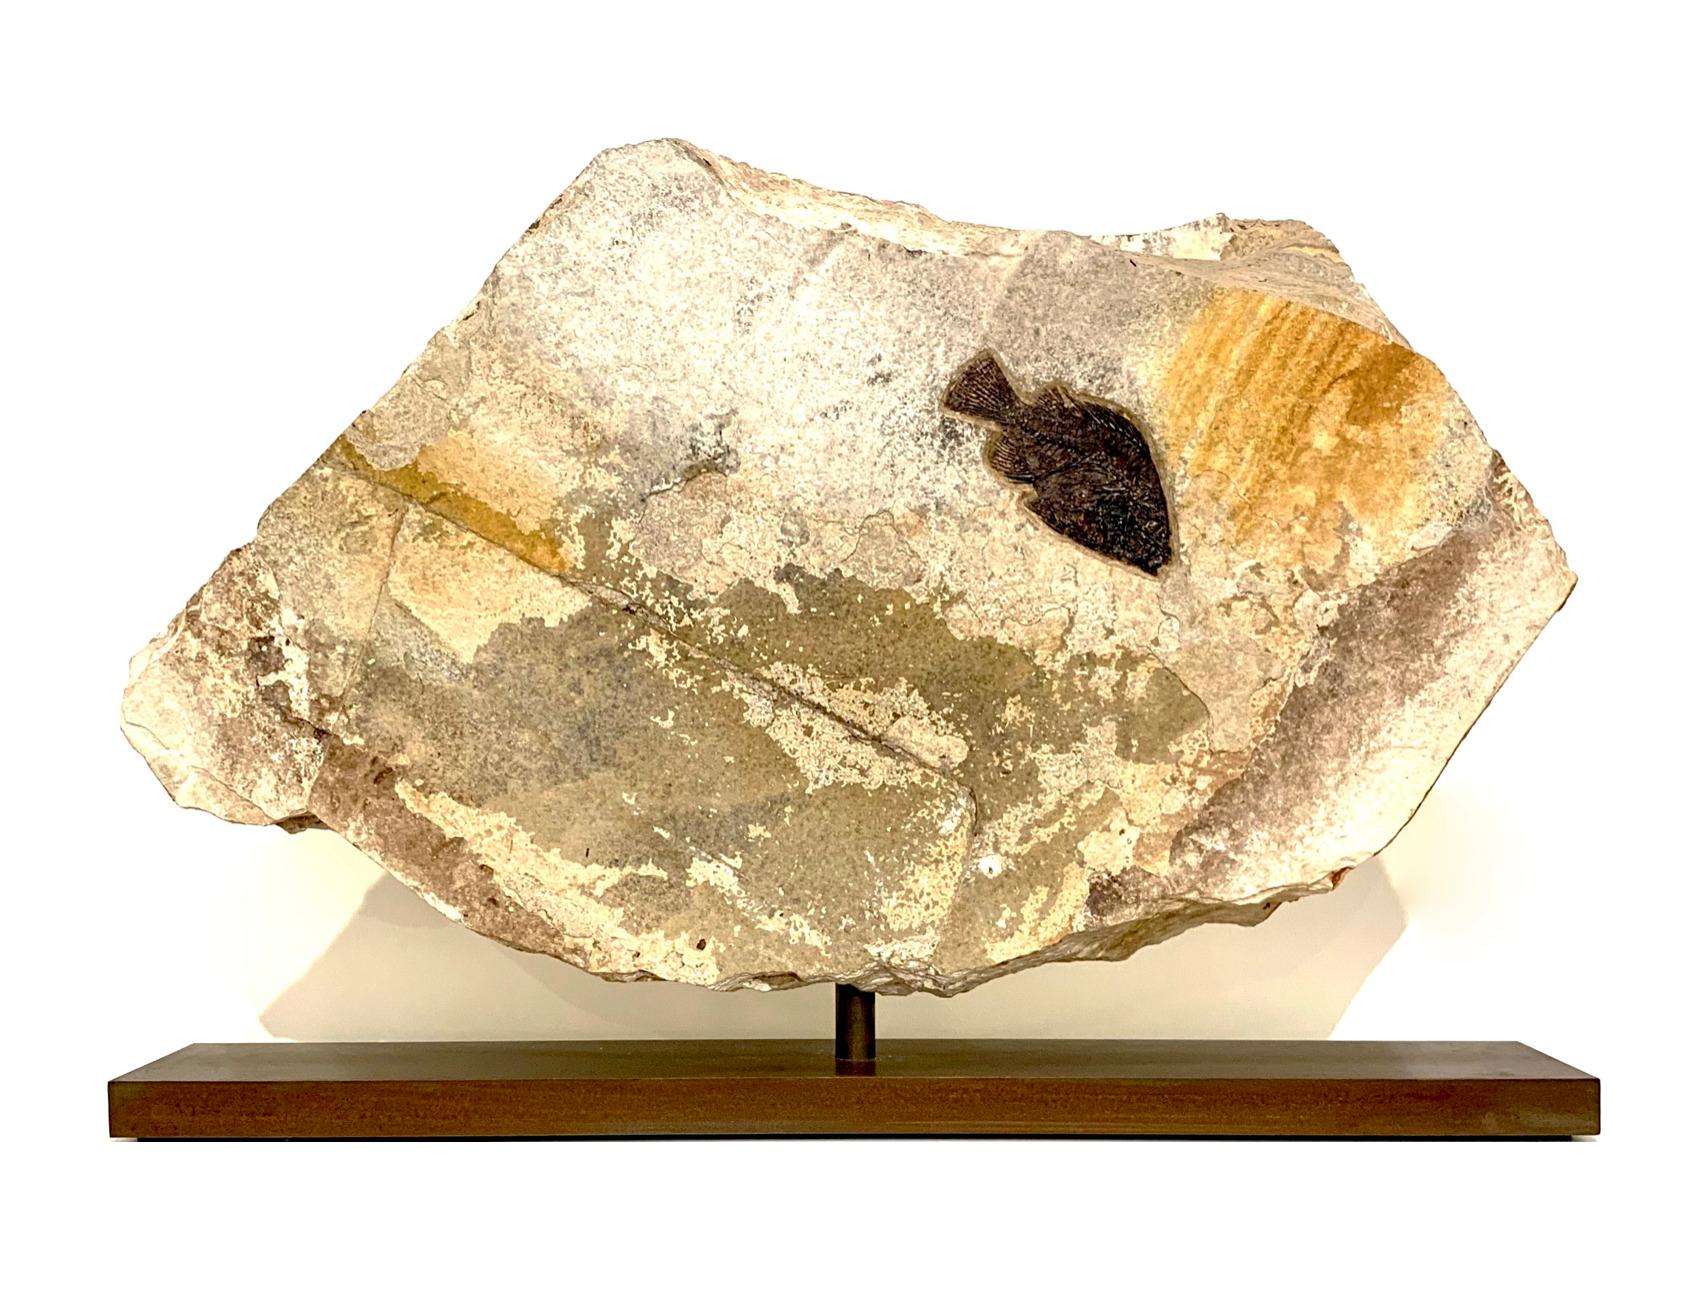 Rotating fossilised fish plate. Green River Formation, Wyoming. Circa 50 Million Years Old. Sold with bespoke steel display stand

Natural History. From rare dinosaur skulls and Stone Age tools to the world’s earliest animals that date back